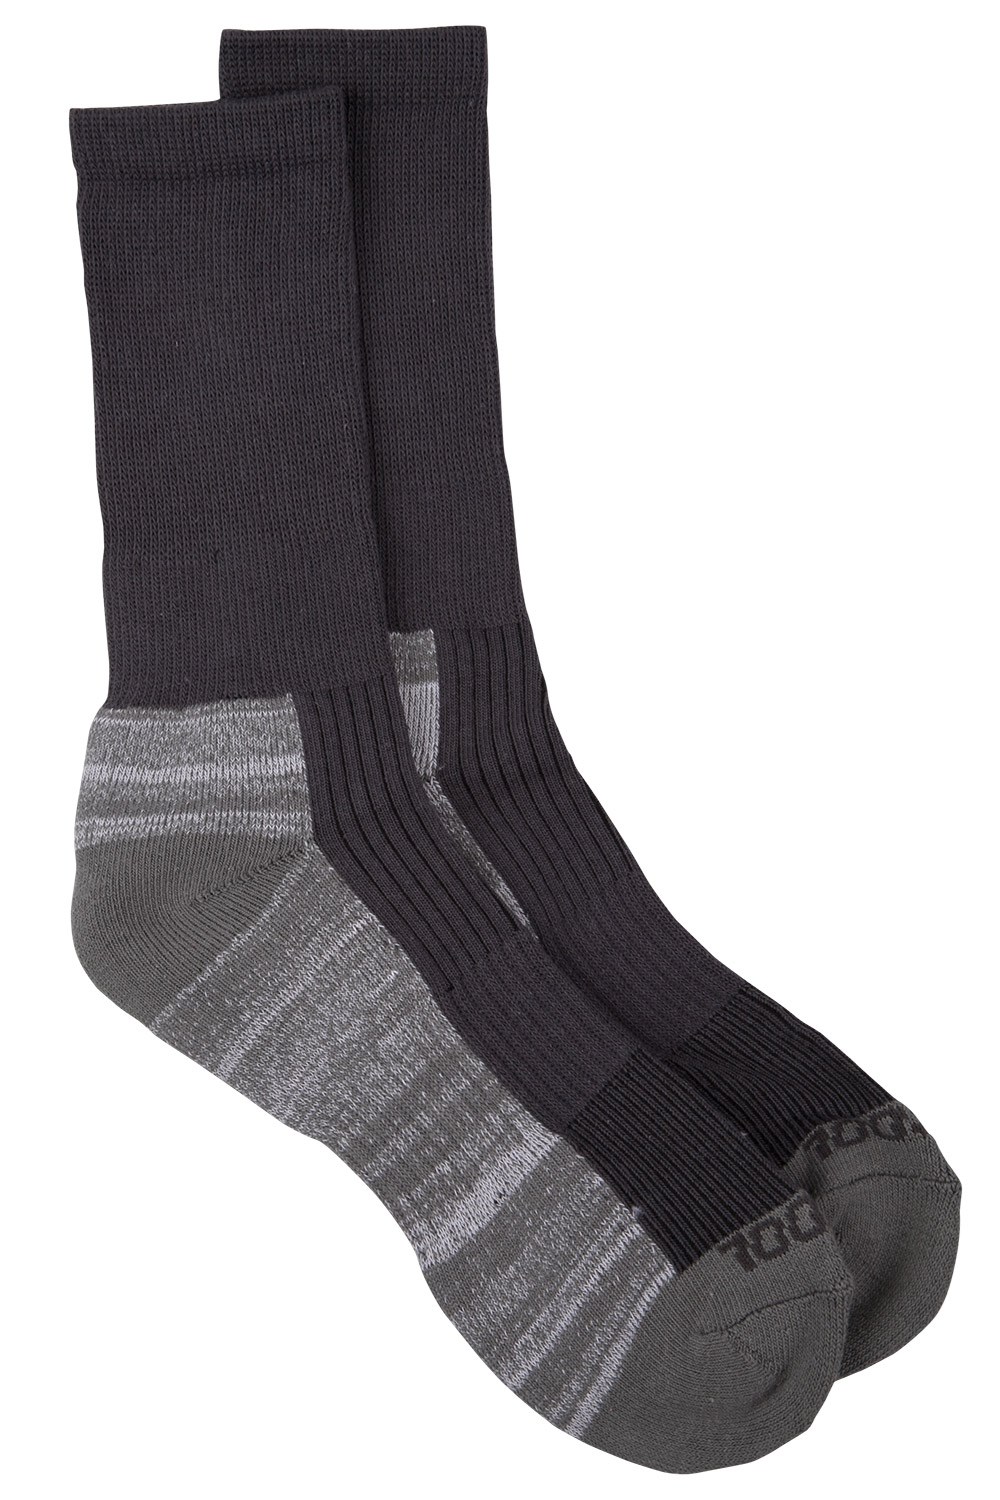 Mountain Warehouse Hommes IsoCool Outdoor Sock Chaussettes